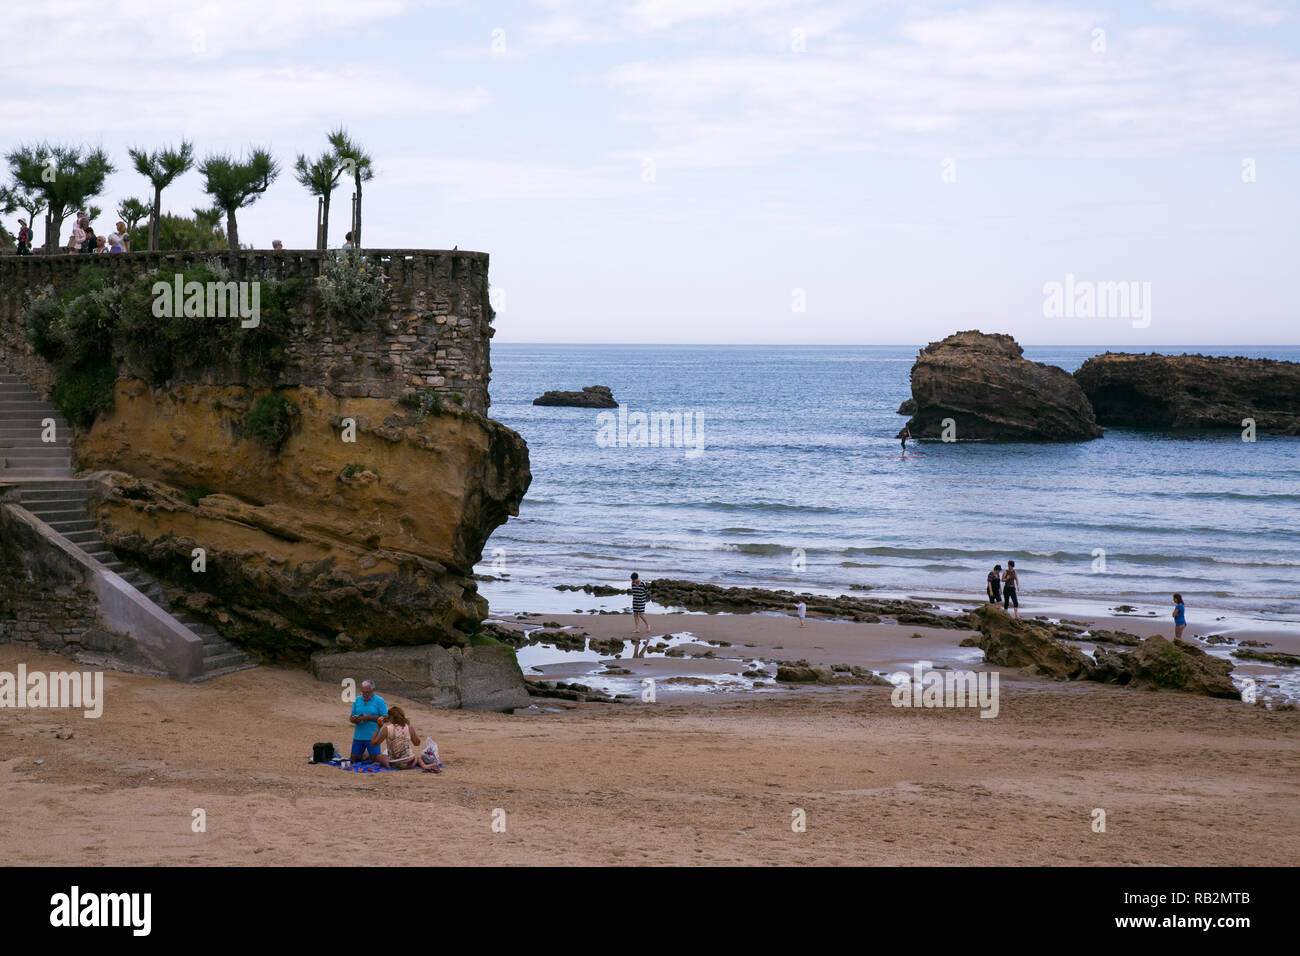 The beach in Biarritz, France. Stock Photo